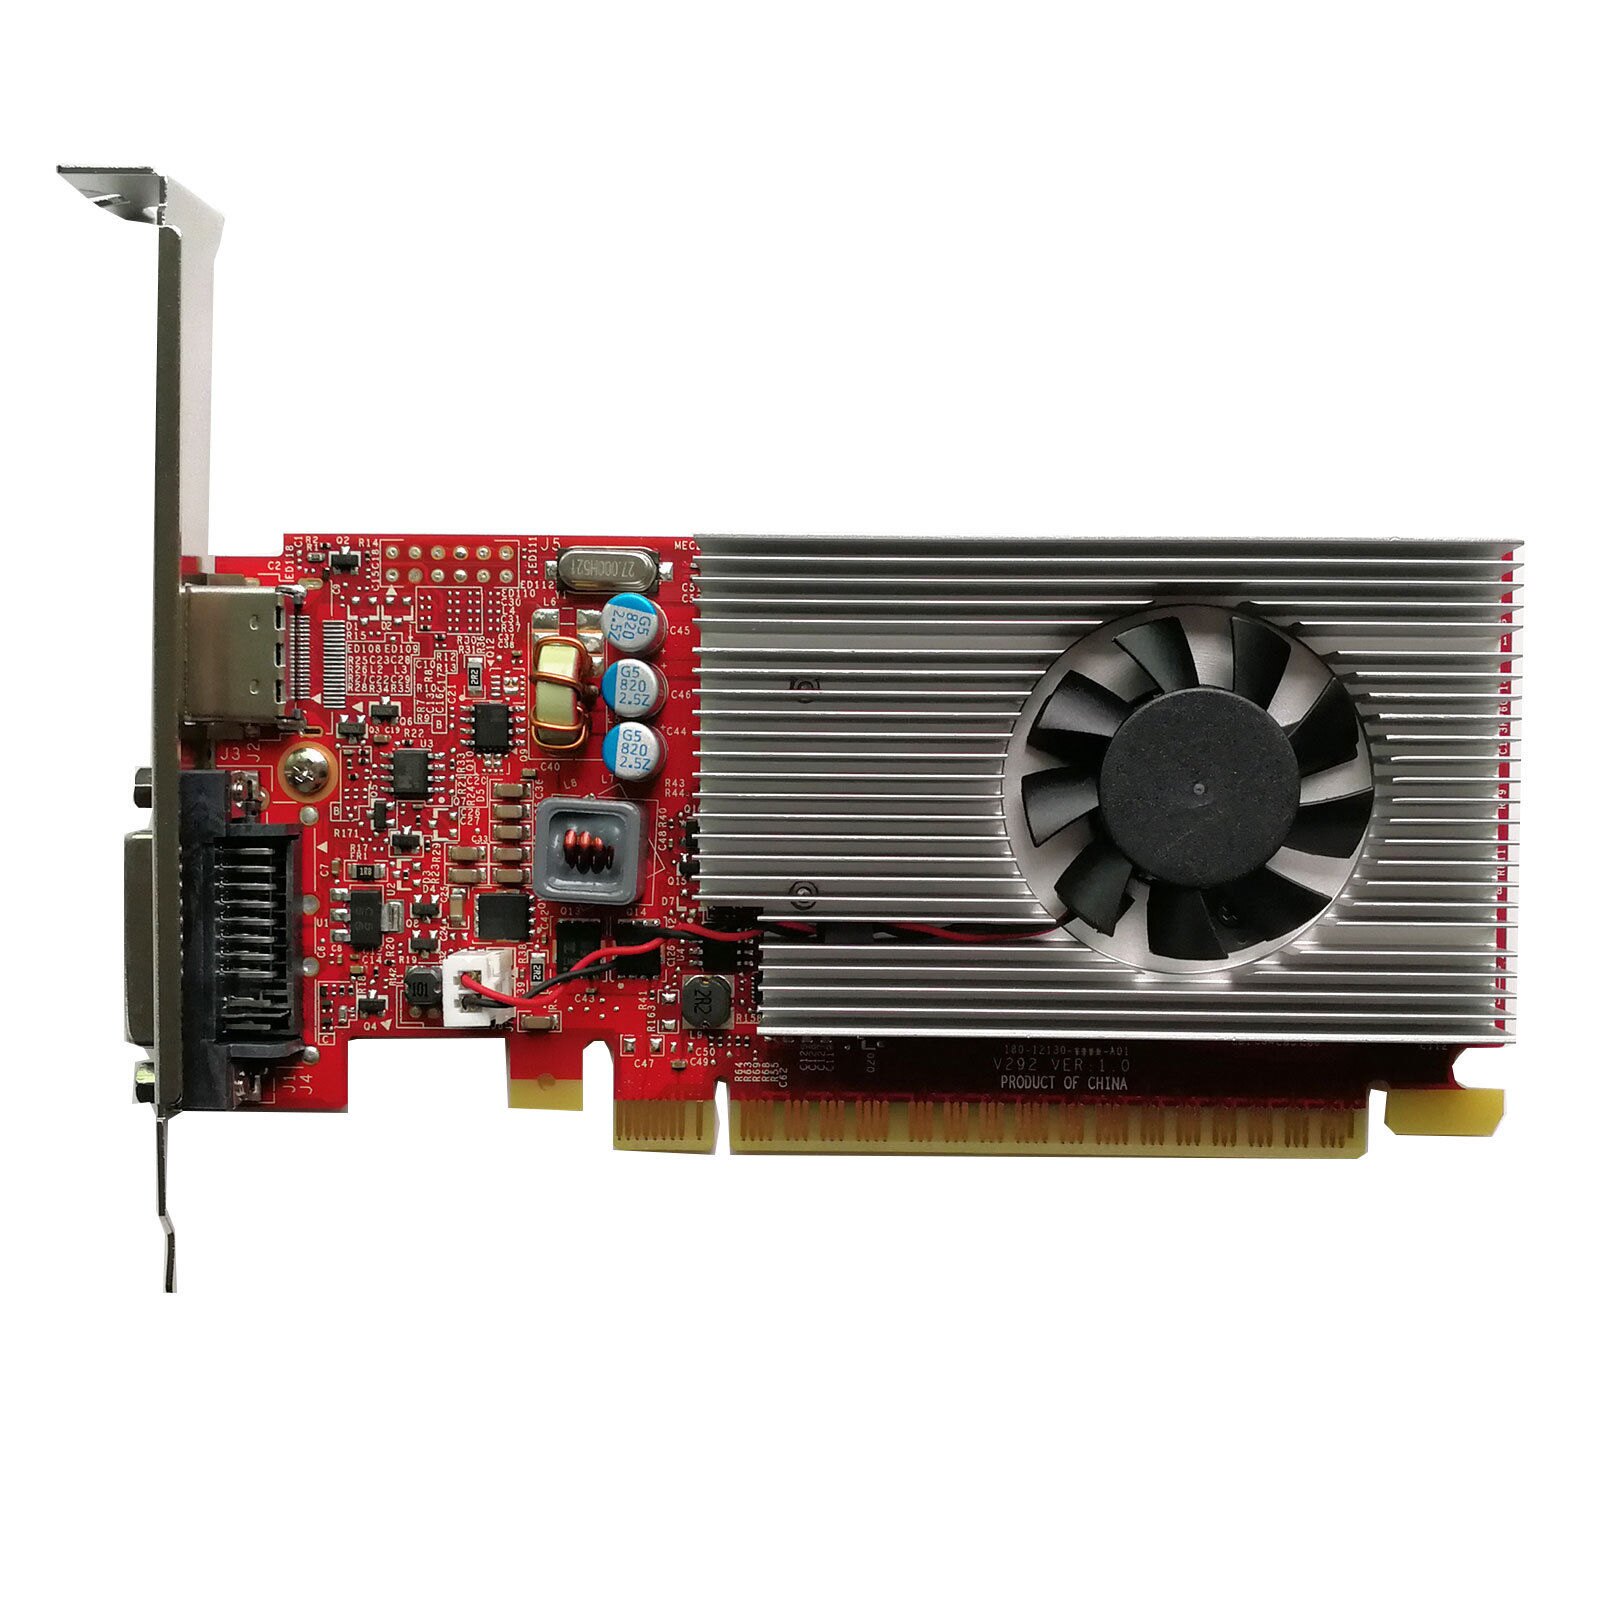 HP nVIDIA GeForce GT730 aries-M1 4GB DDR3 PCI-E x8 805733-001 [GT730]  $129.00 Professional Multi Monitor Workstations, Graphics Card Experts